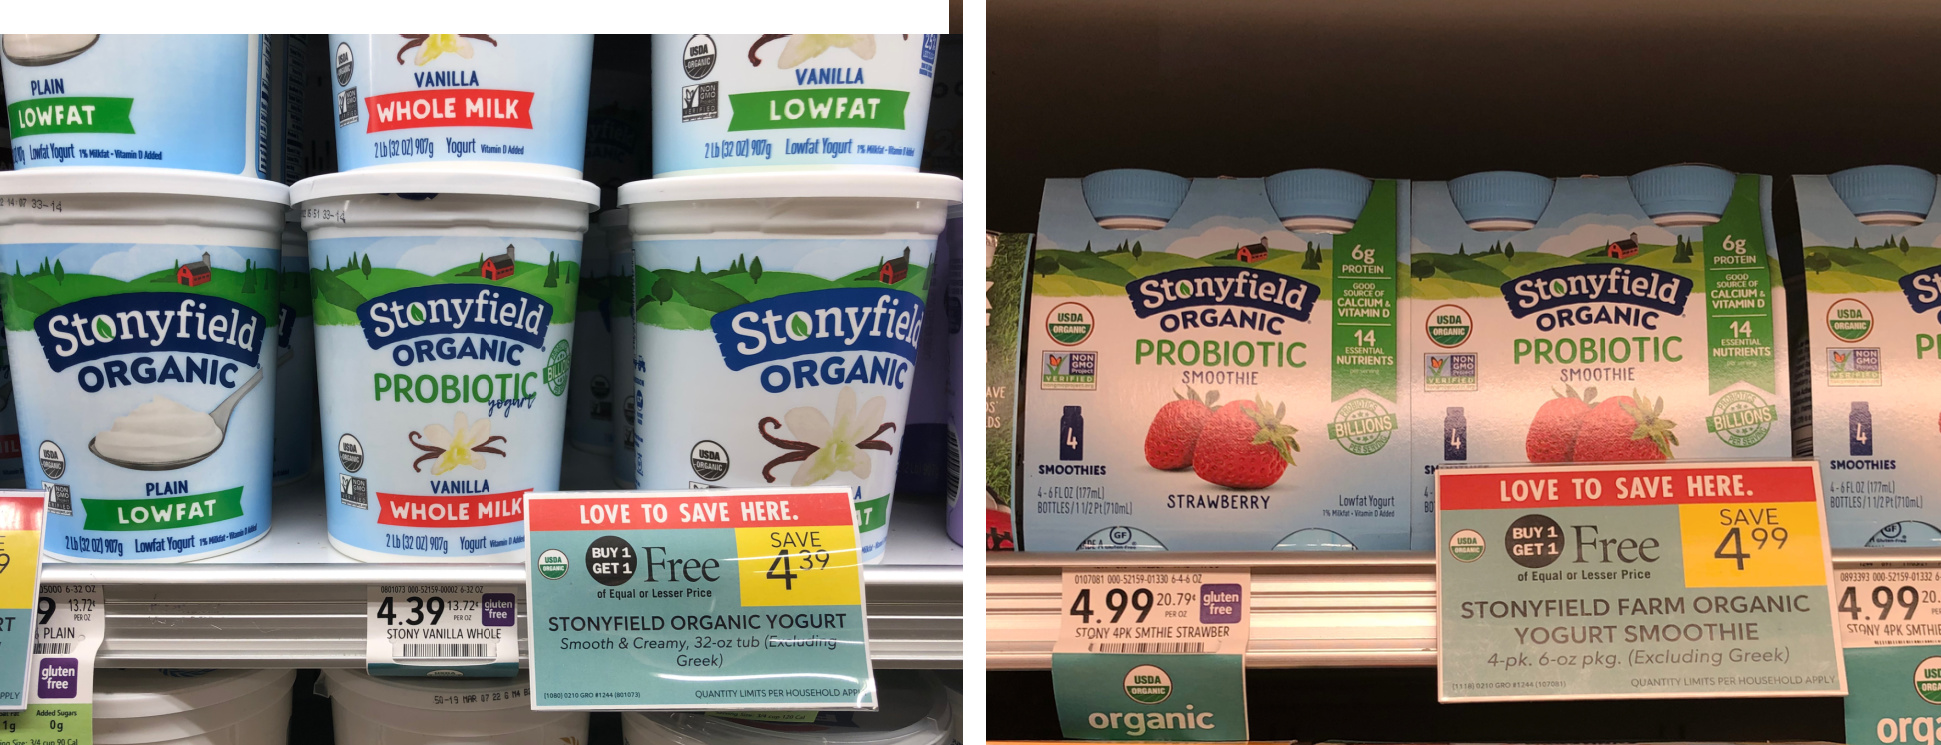 Your Favorite Stonyfield Organic Yogurt Products Are BOGO This Week At Publix on I Heart Publix 2